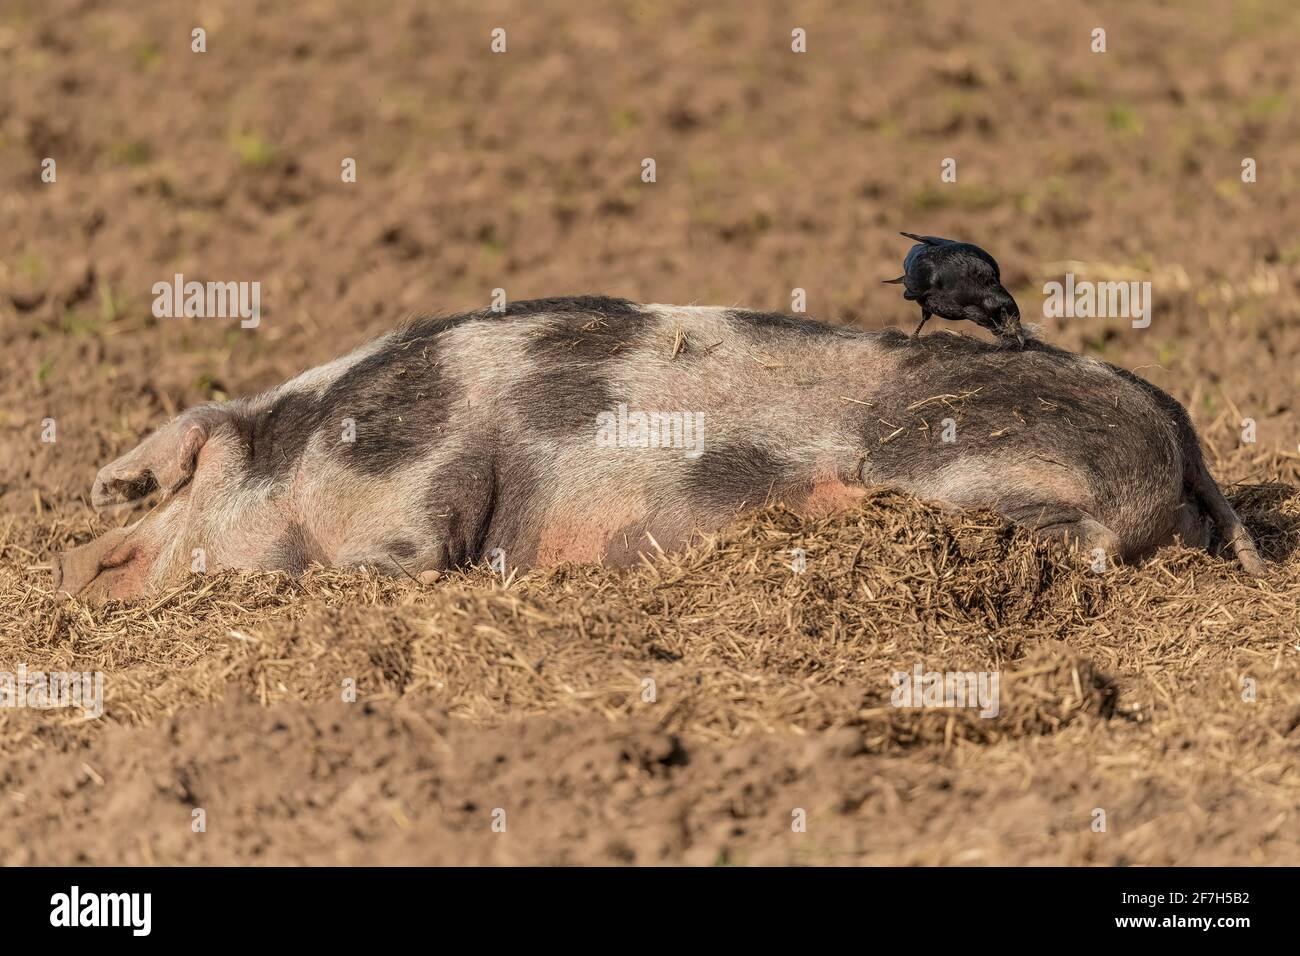 A Crow plucking hair from a sleeping Pig’s back to line its nest. Stock Photo